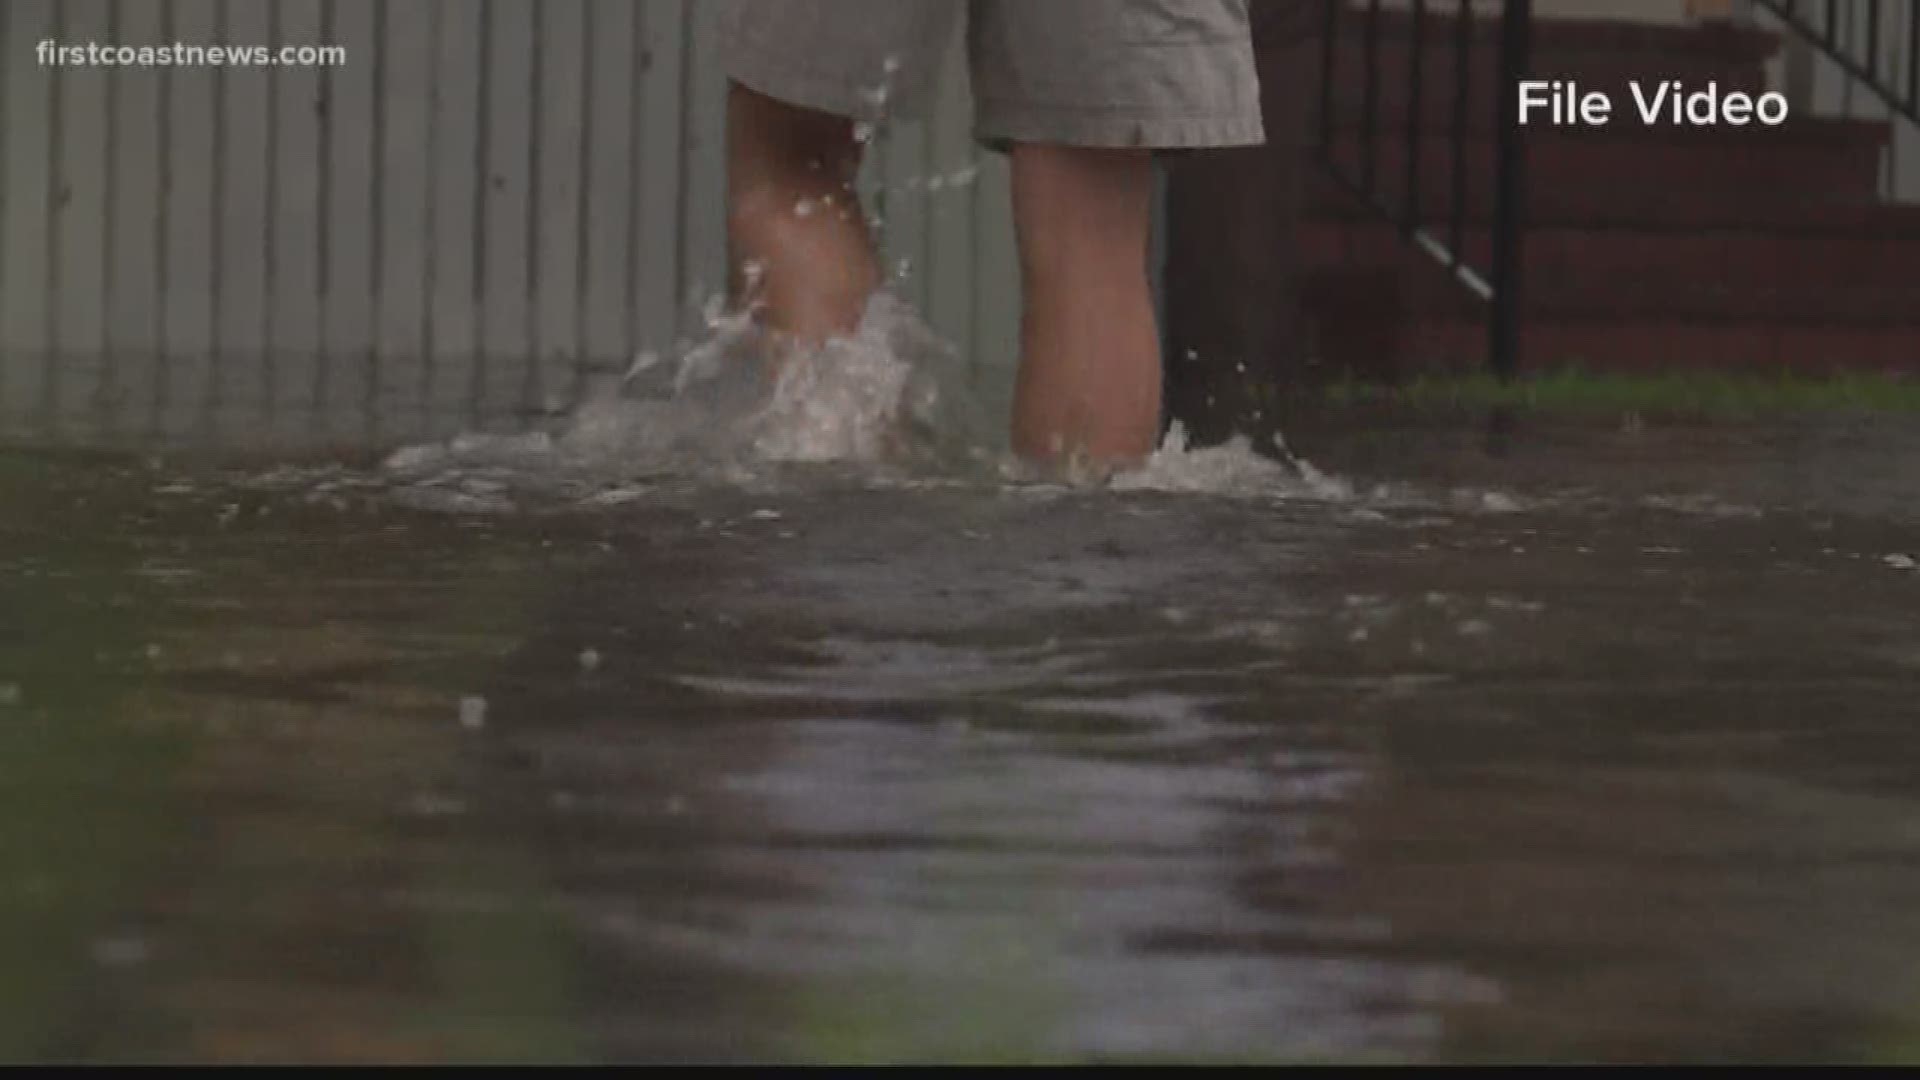 A report done for the UN on climate change says sea levels are rising at a rapid rate and could mean a lot more flooding for cities like Jacksonville.